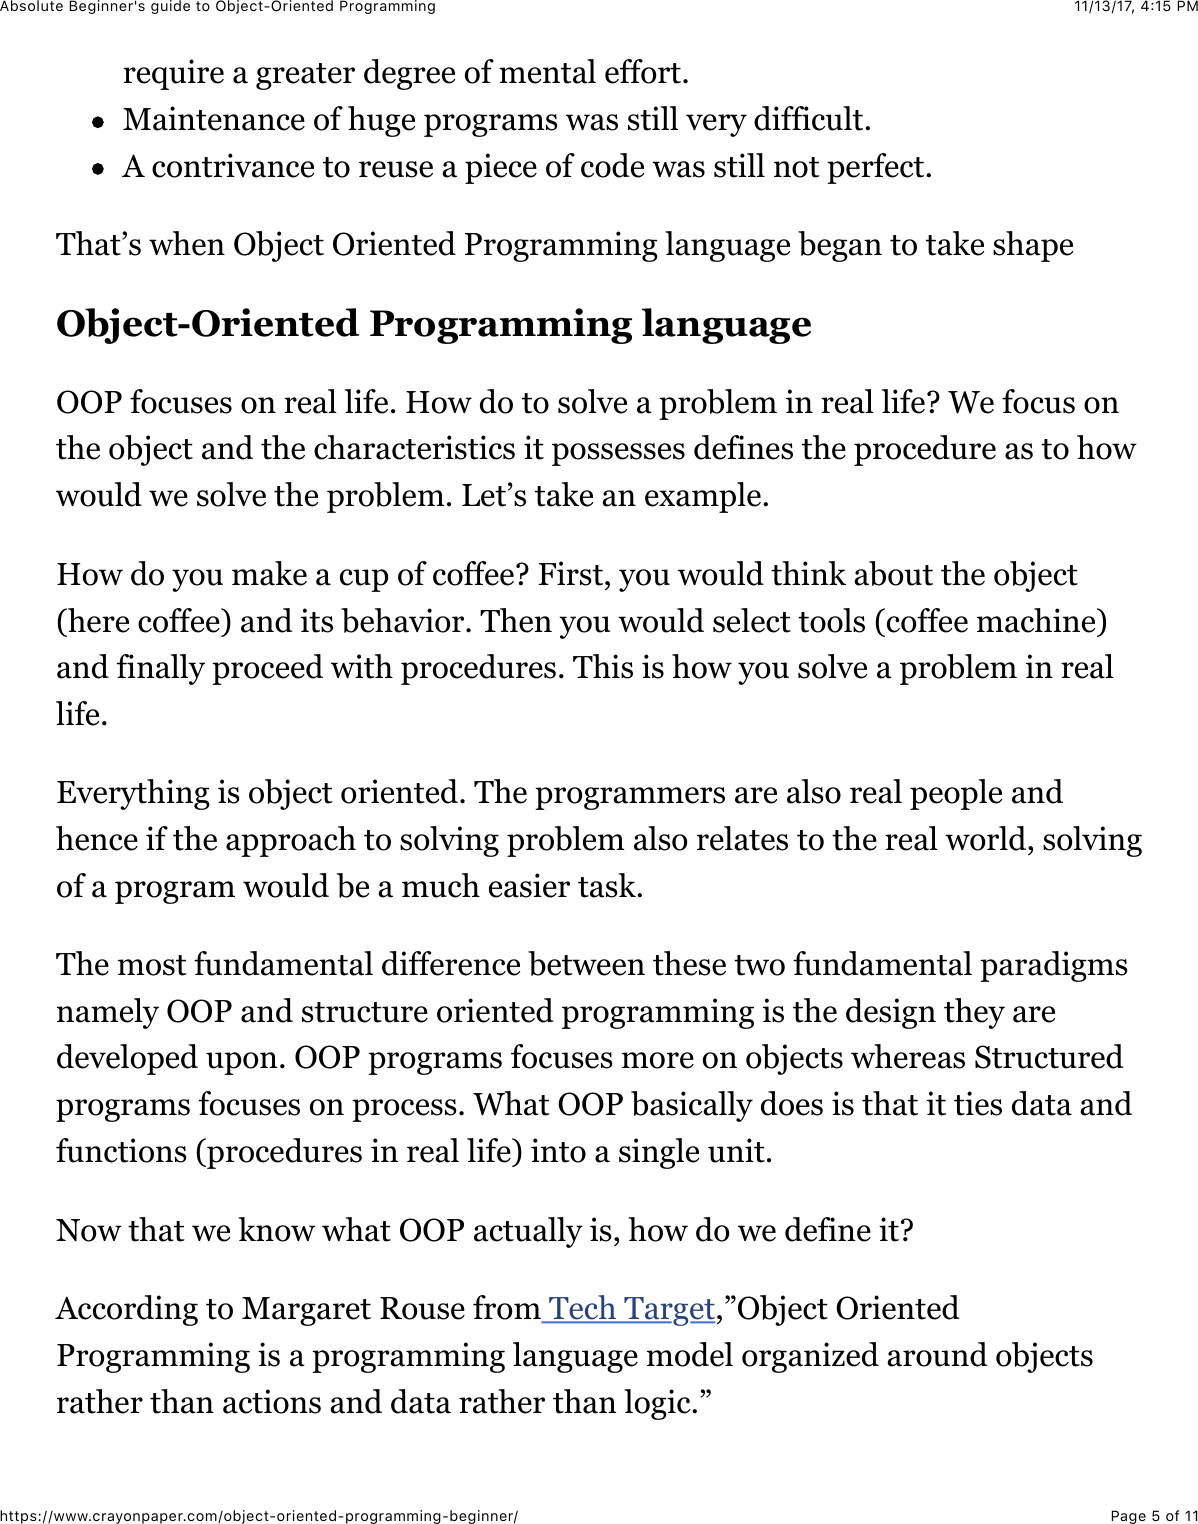 Page 5 of 11 - Absolute Beginner's Guide To Object-Oriented Programming